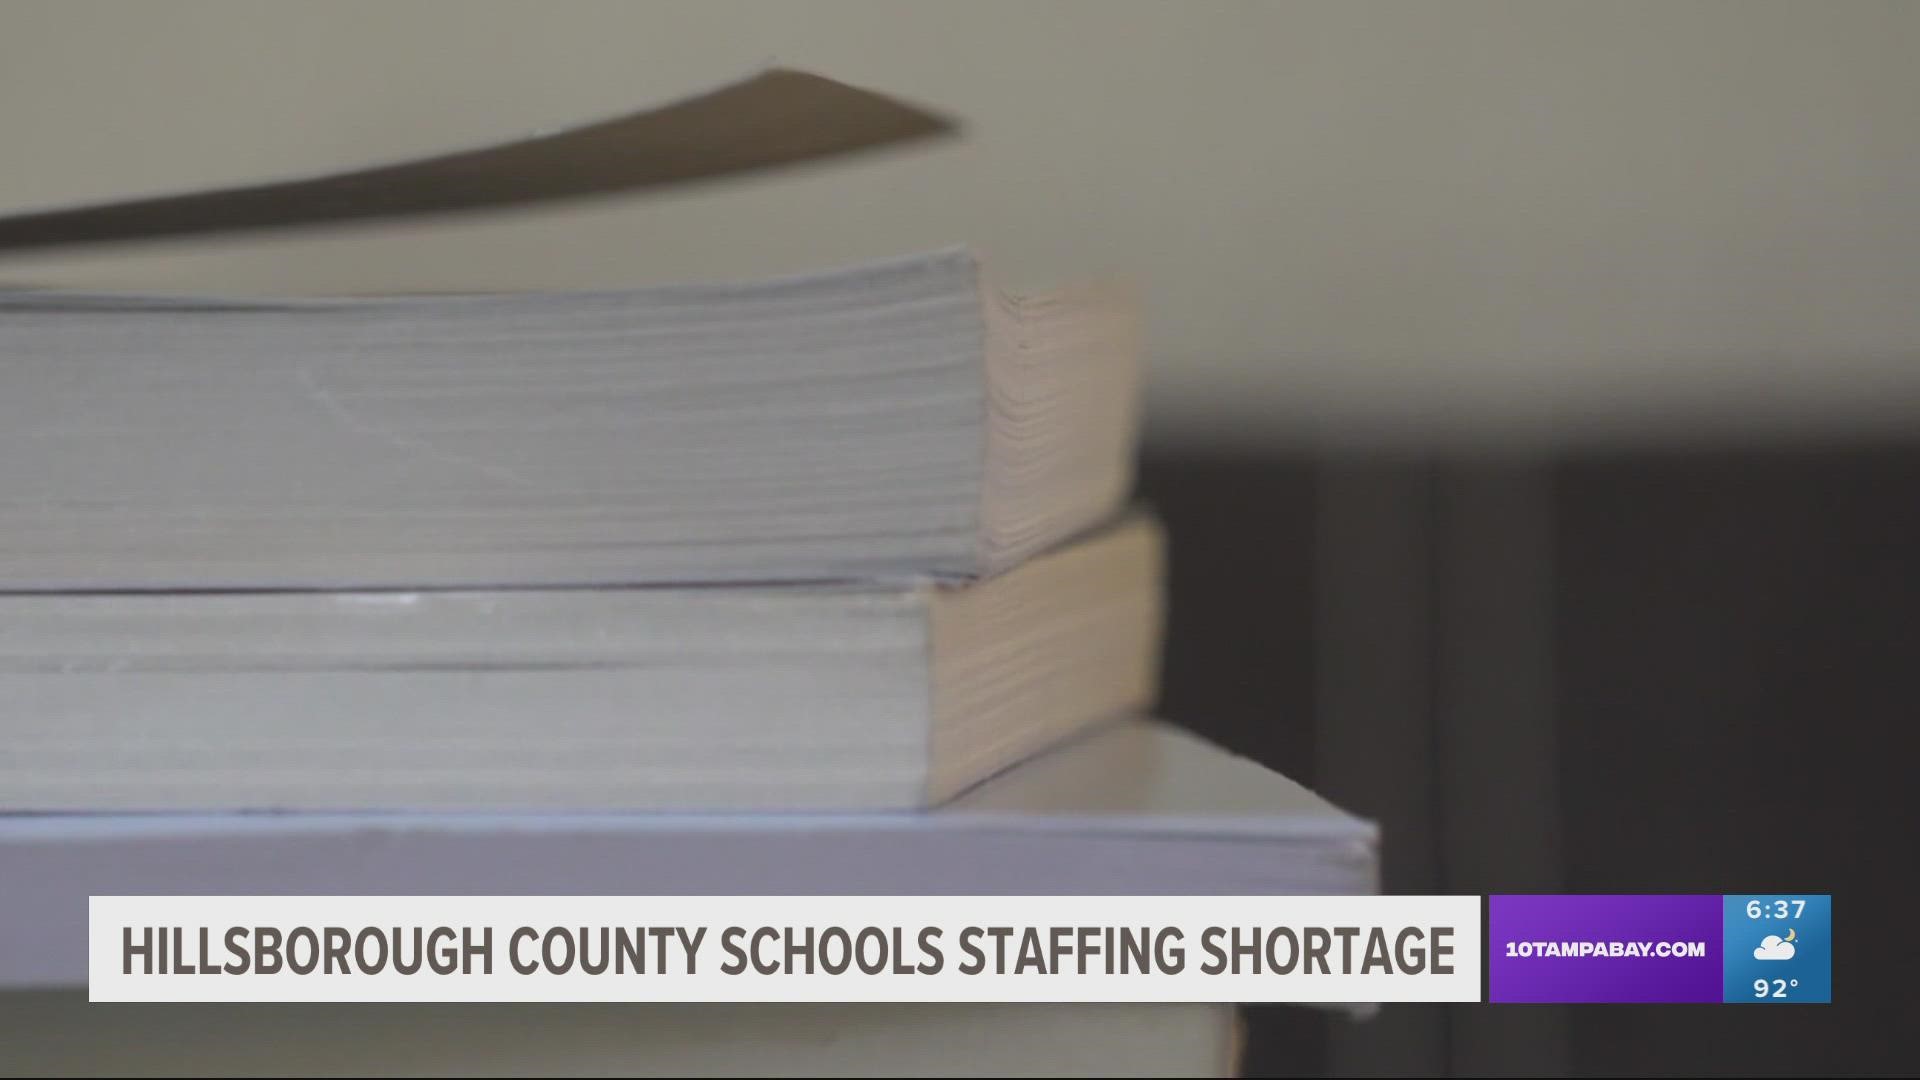 Kids across Hillsborough County are gearing up to head back to the classroom, but a major staffing shortage is causing problems for schools across the district.